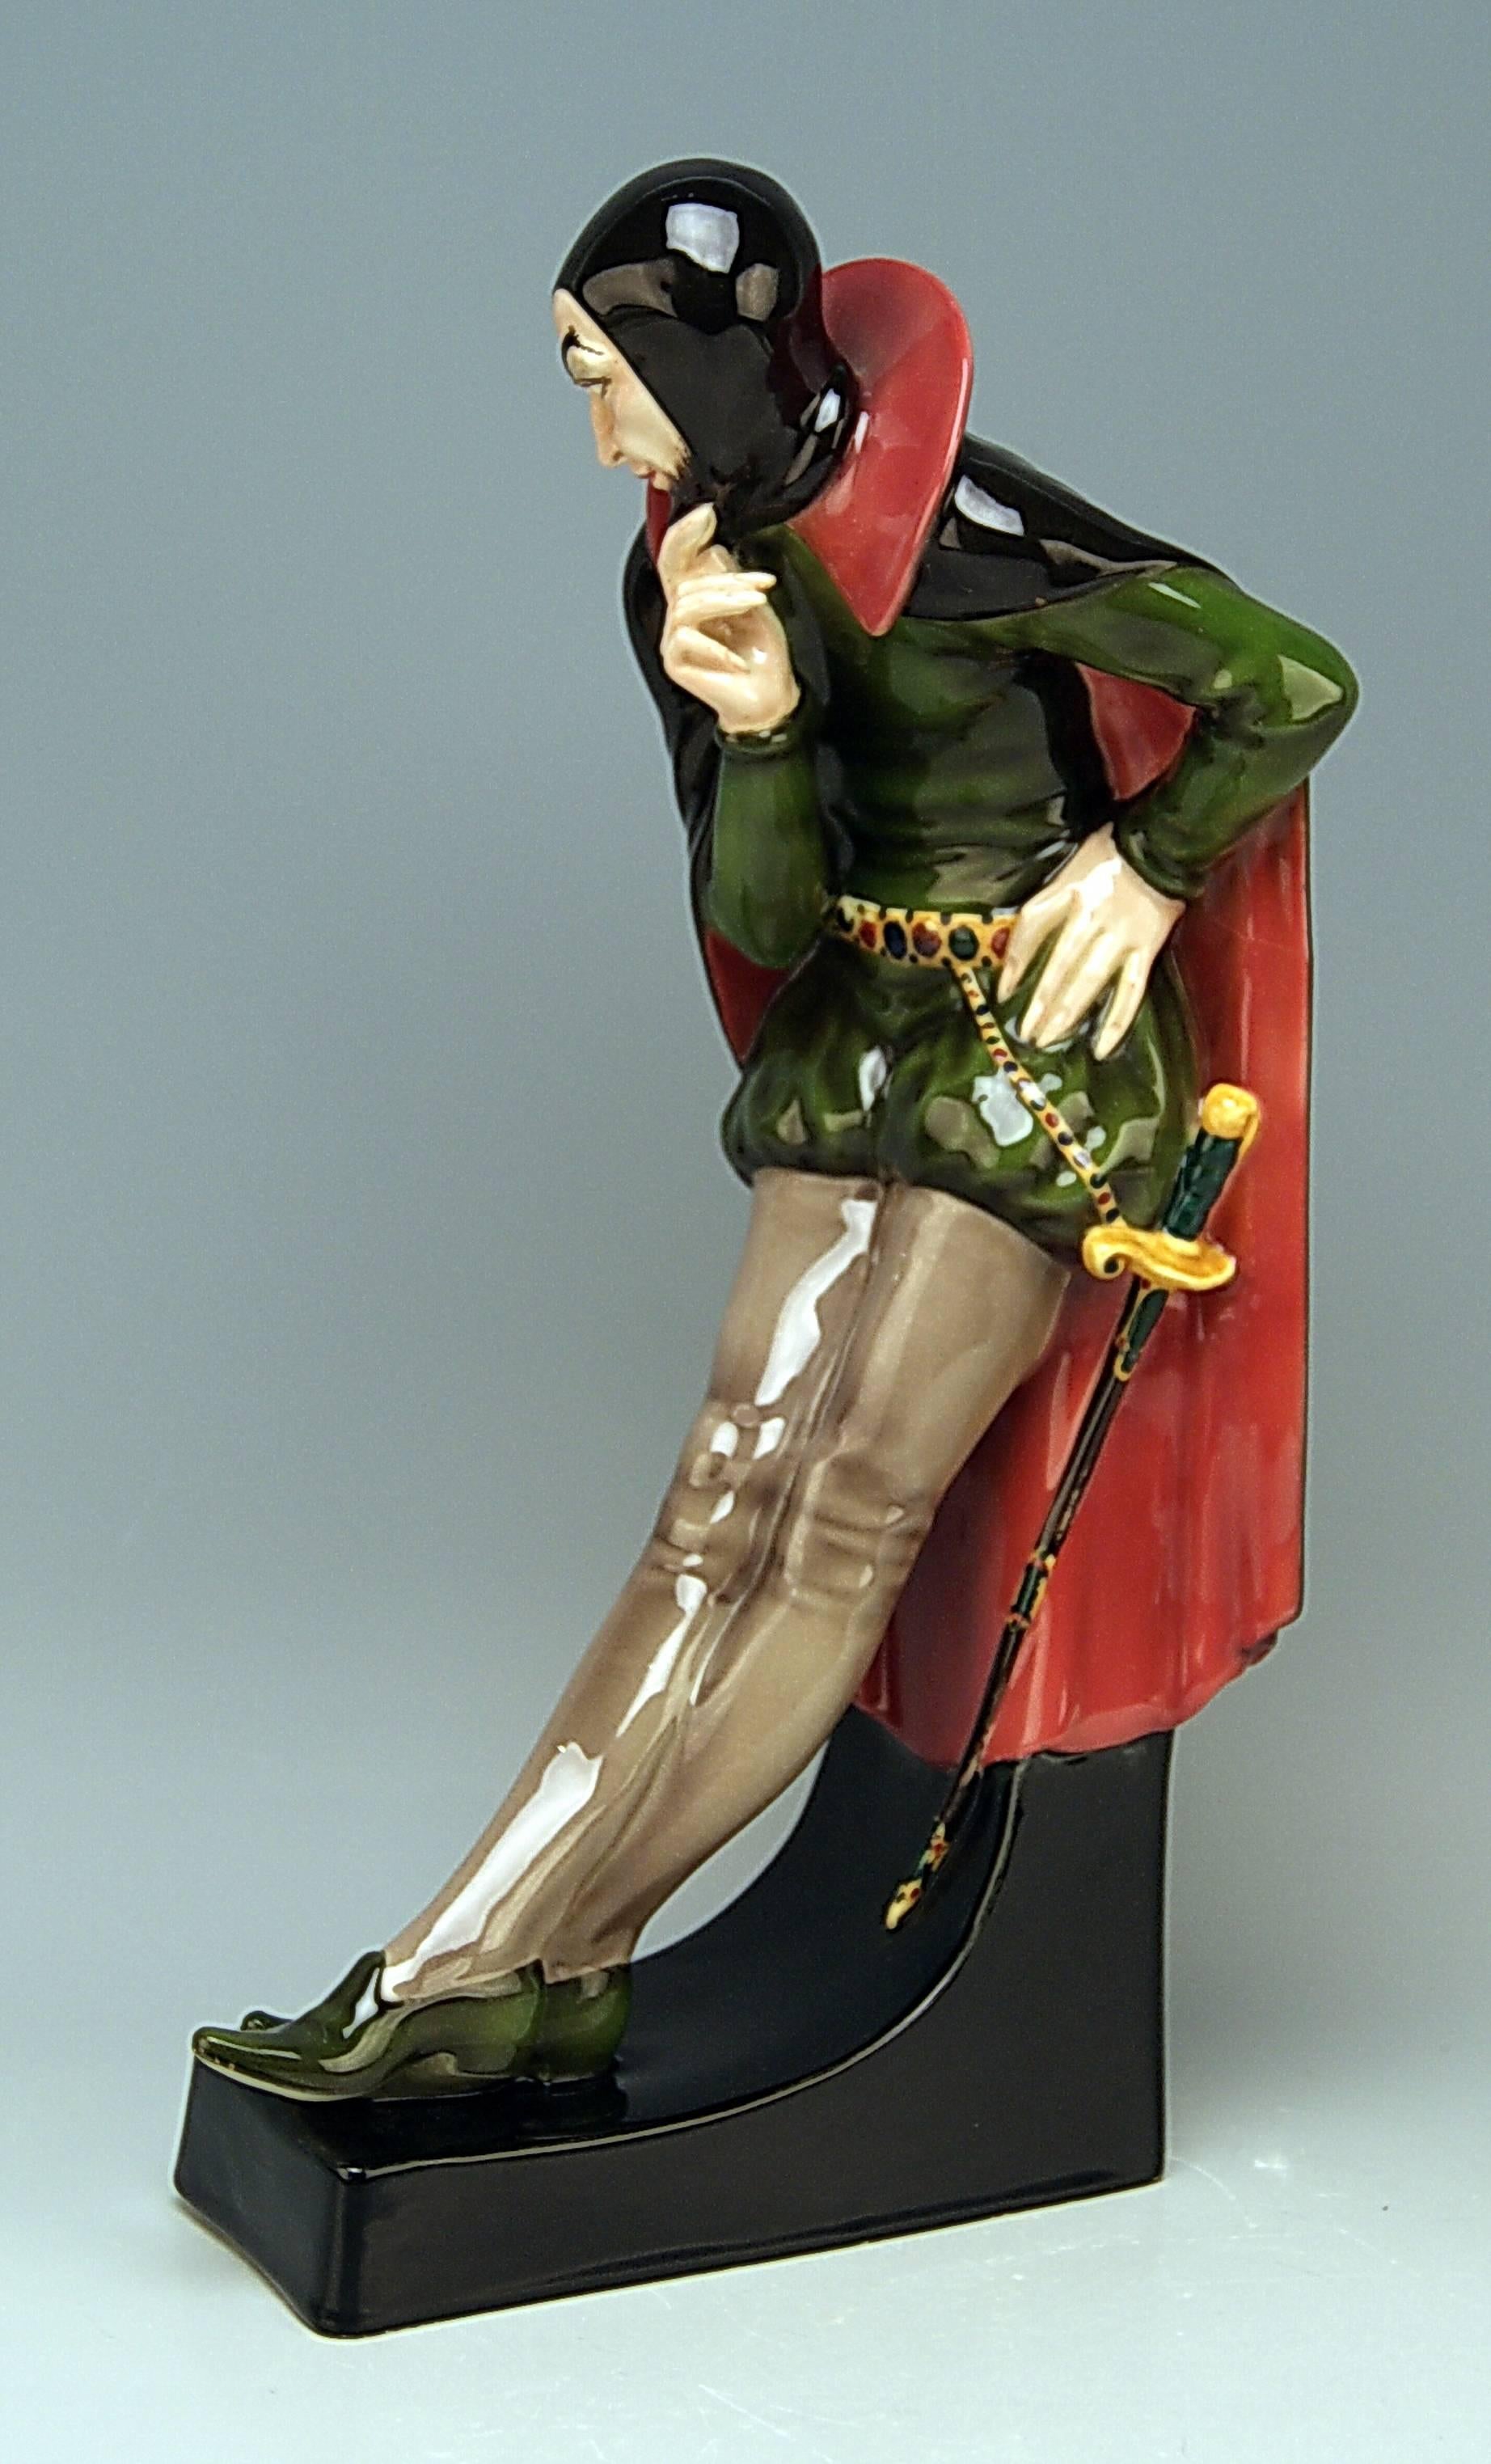 Goldscheider Vienna gorgeous rare figurine: Mephisto / Devil

Designed by Josef Lorenzl (1892-1950) / one of the most important designers having been active for Goldscheider manufactory in period of 1920 - 1940 / DESIGNED 1925/26 (= QUITE EARLY !)